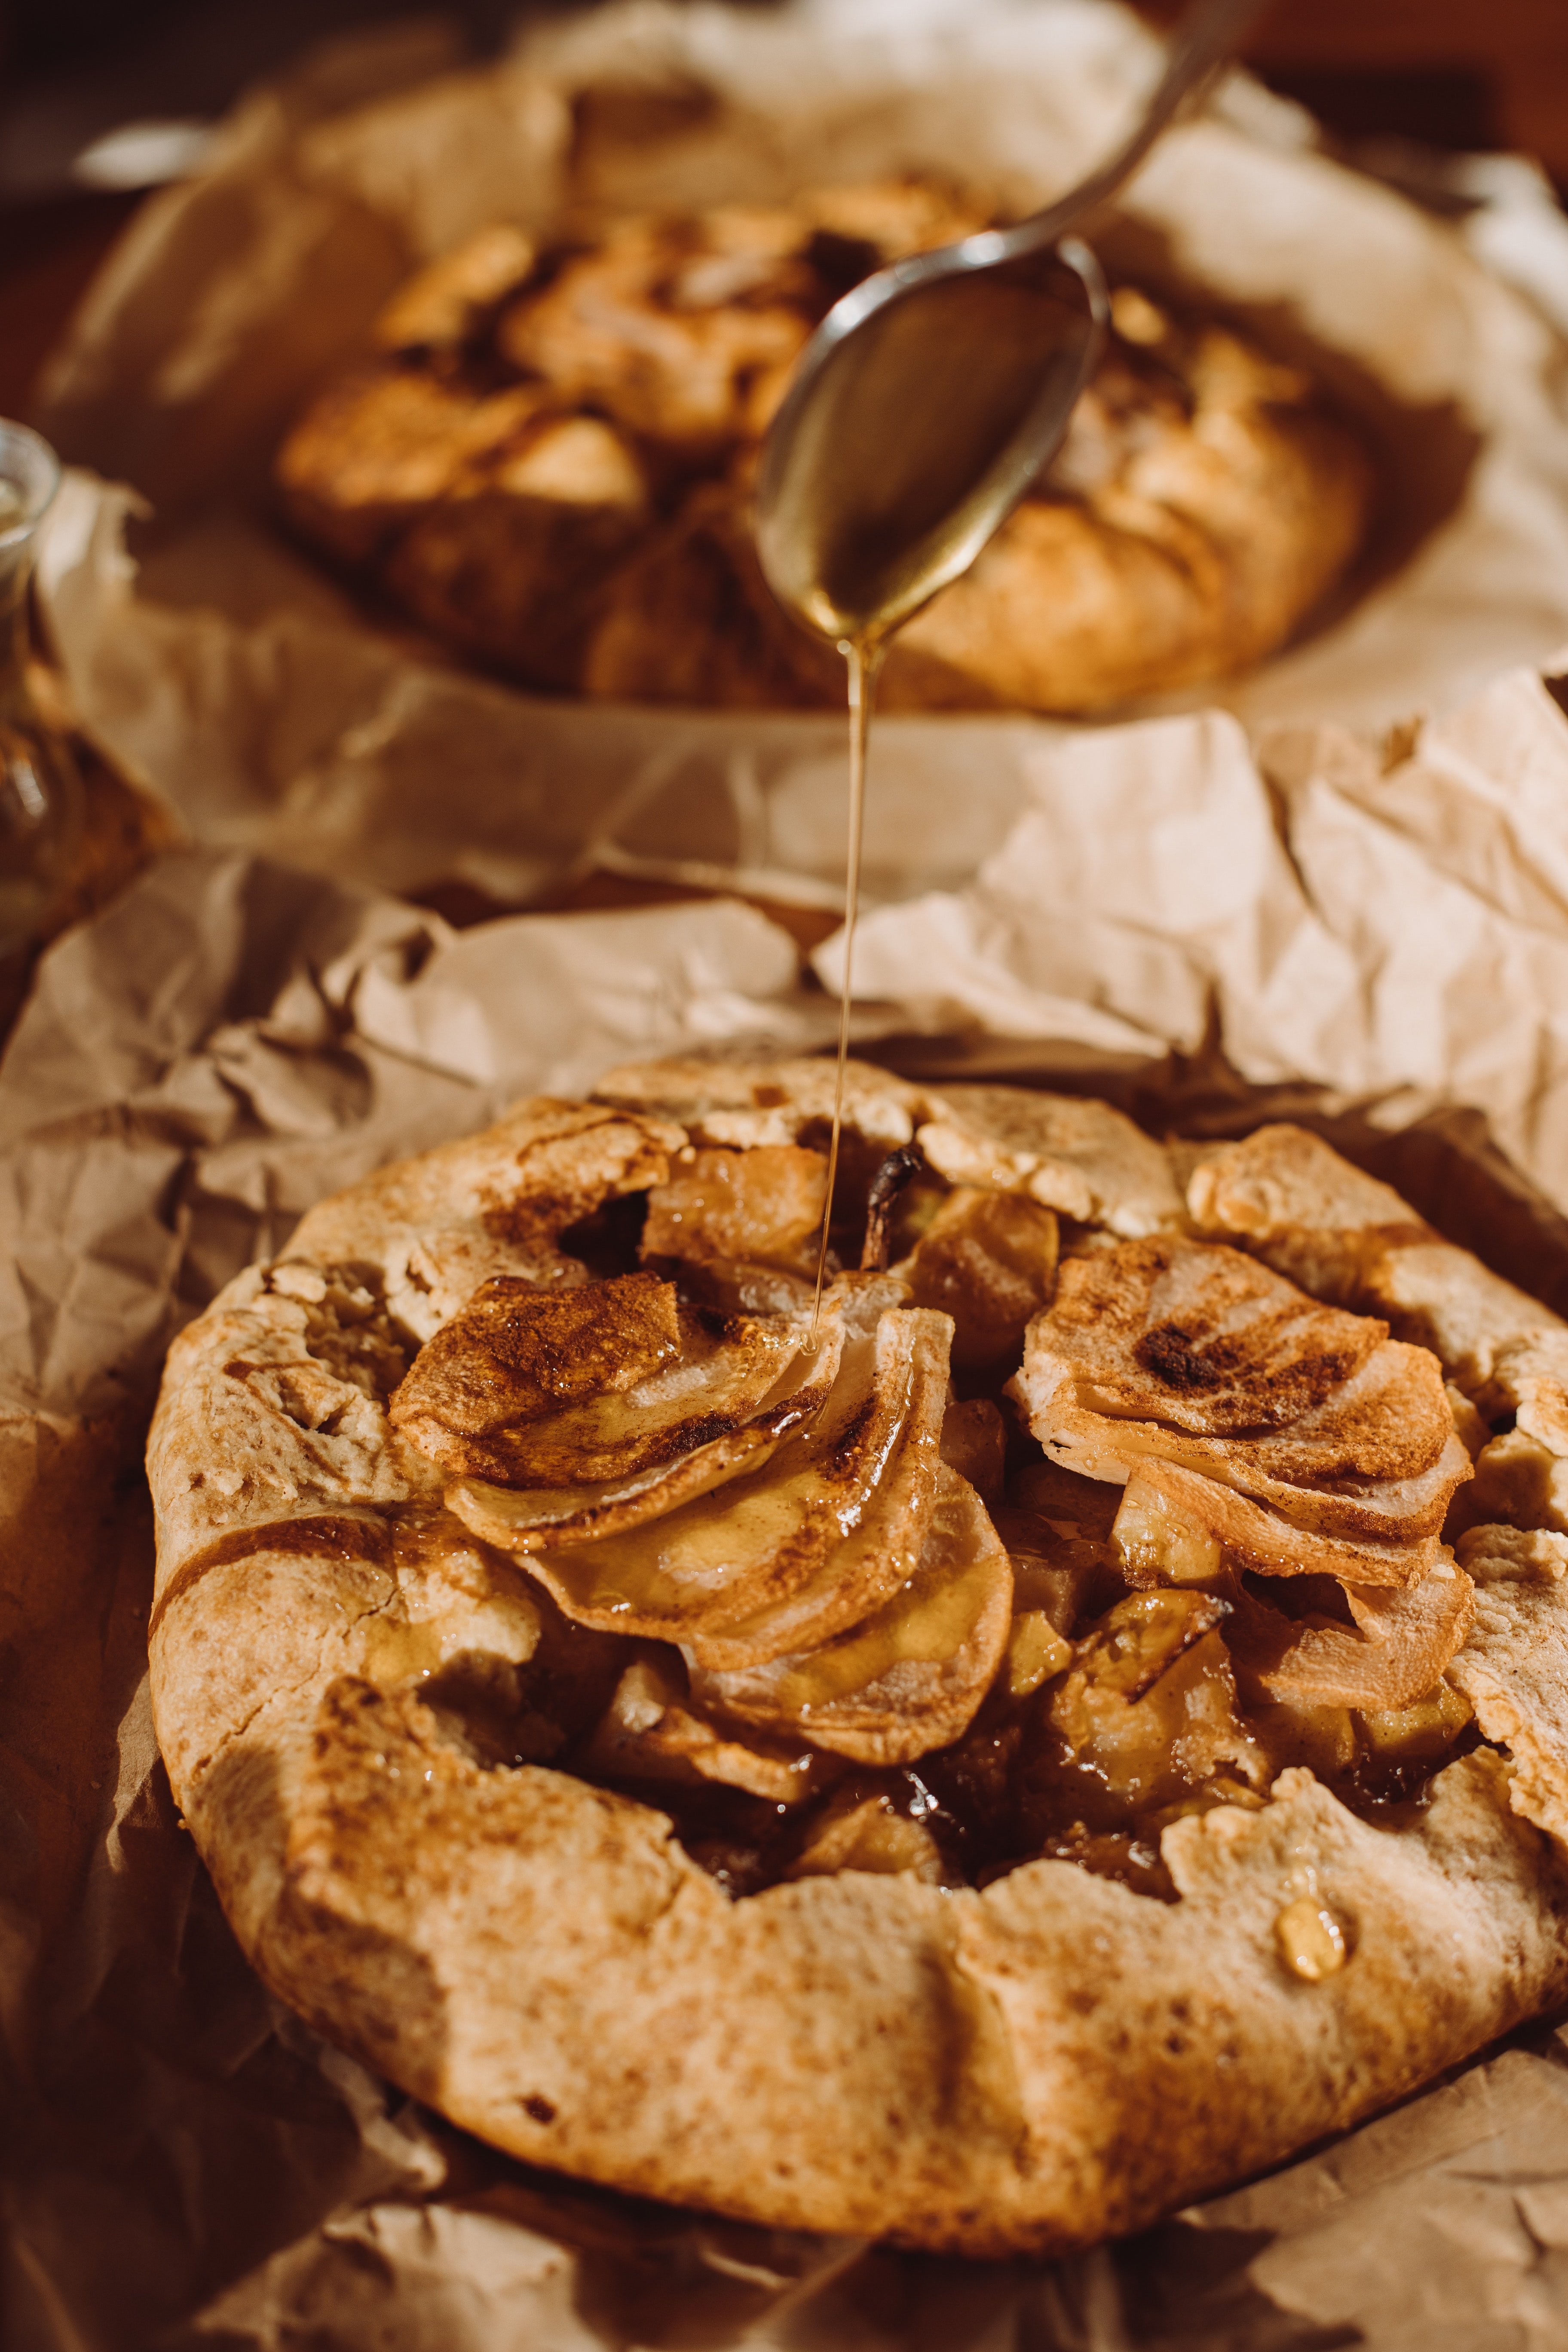 Catherine was teaching Arnold how to make her famous apple pie. | Source: Pexels